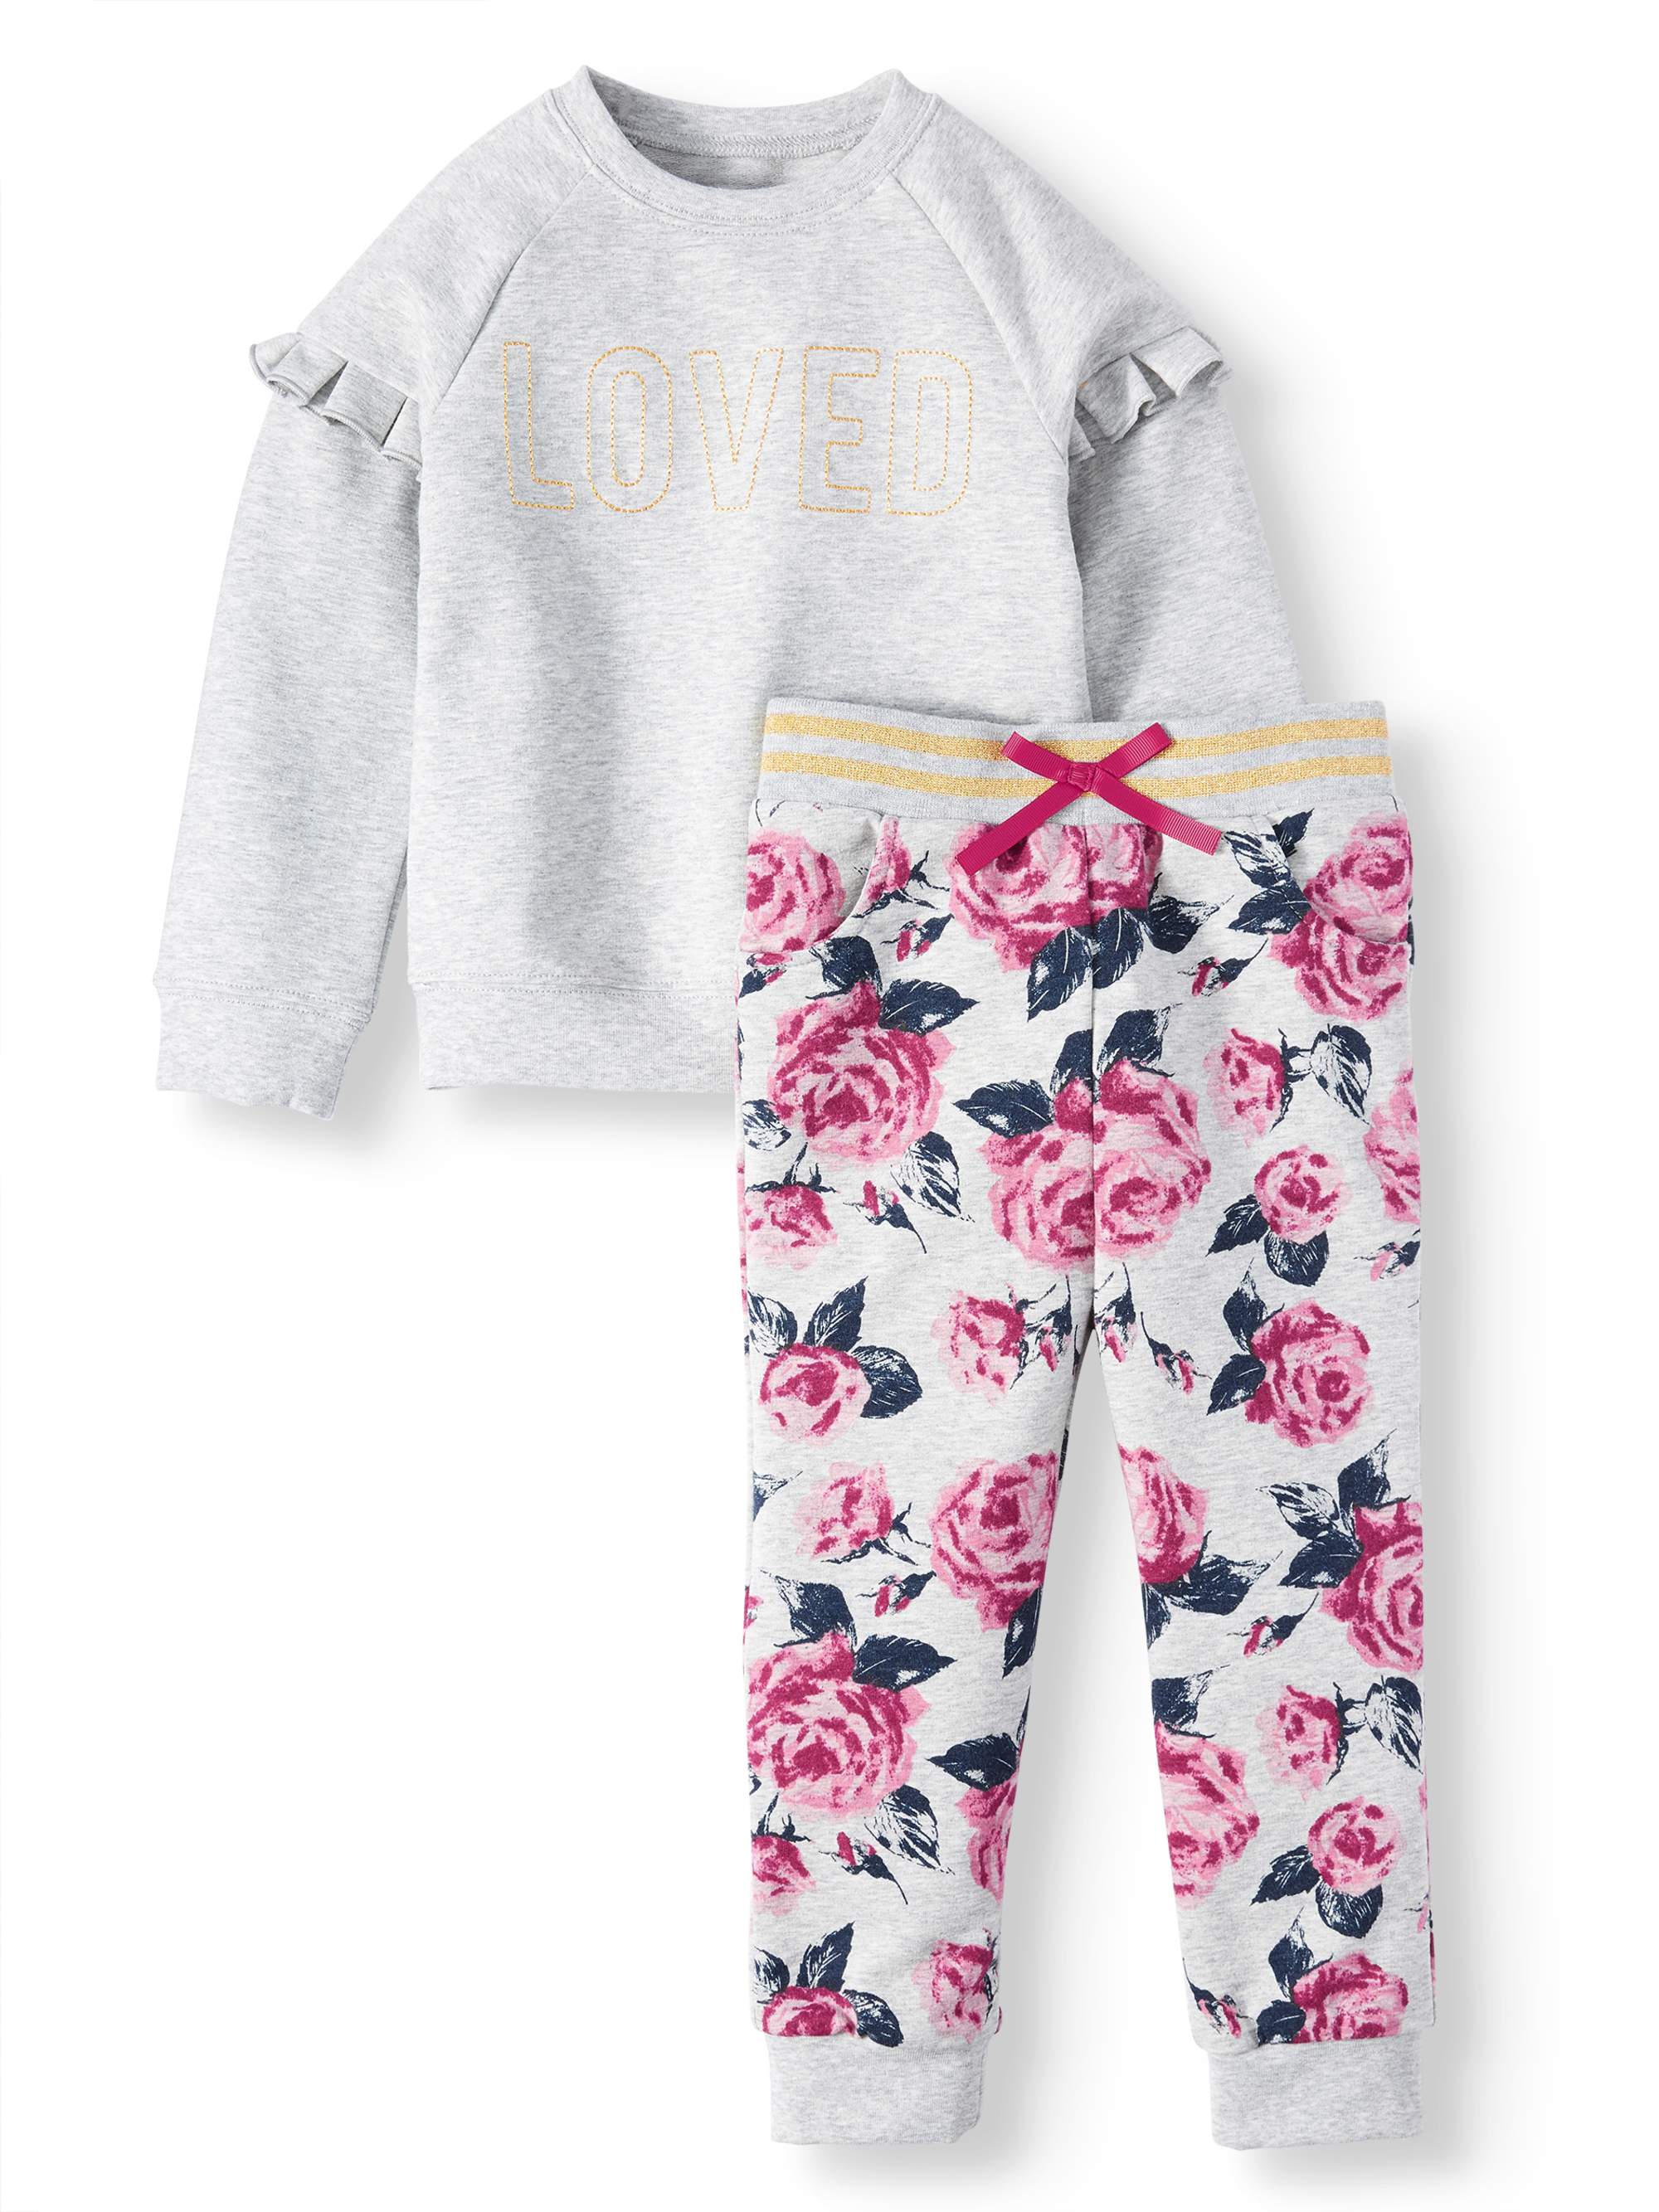 Wonder Nation Ruffle Fleece Top and Floral Jogger Pants, 2pc Outfit Set (Toddler Girls) - image 1 of 2